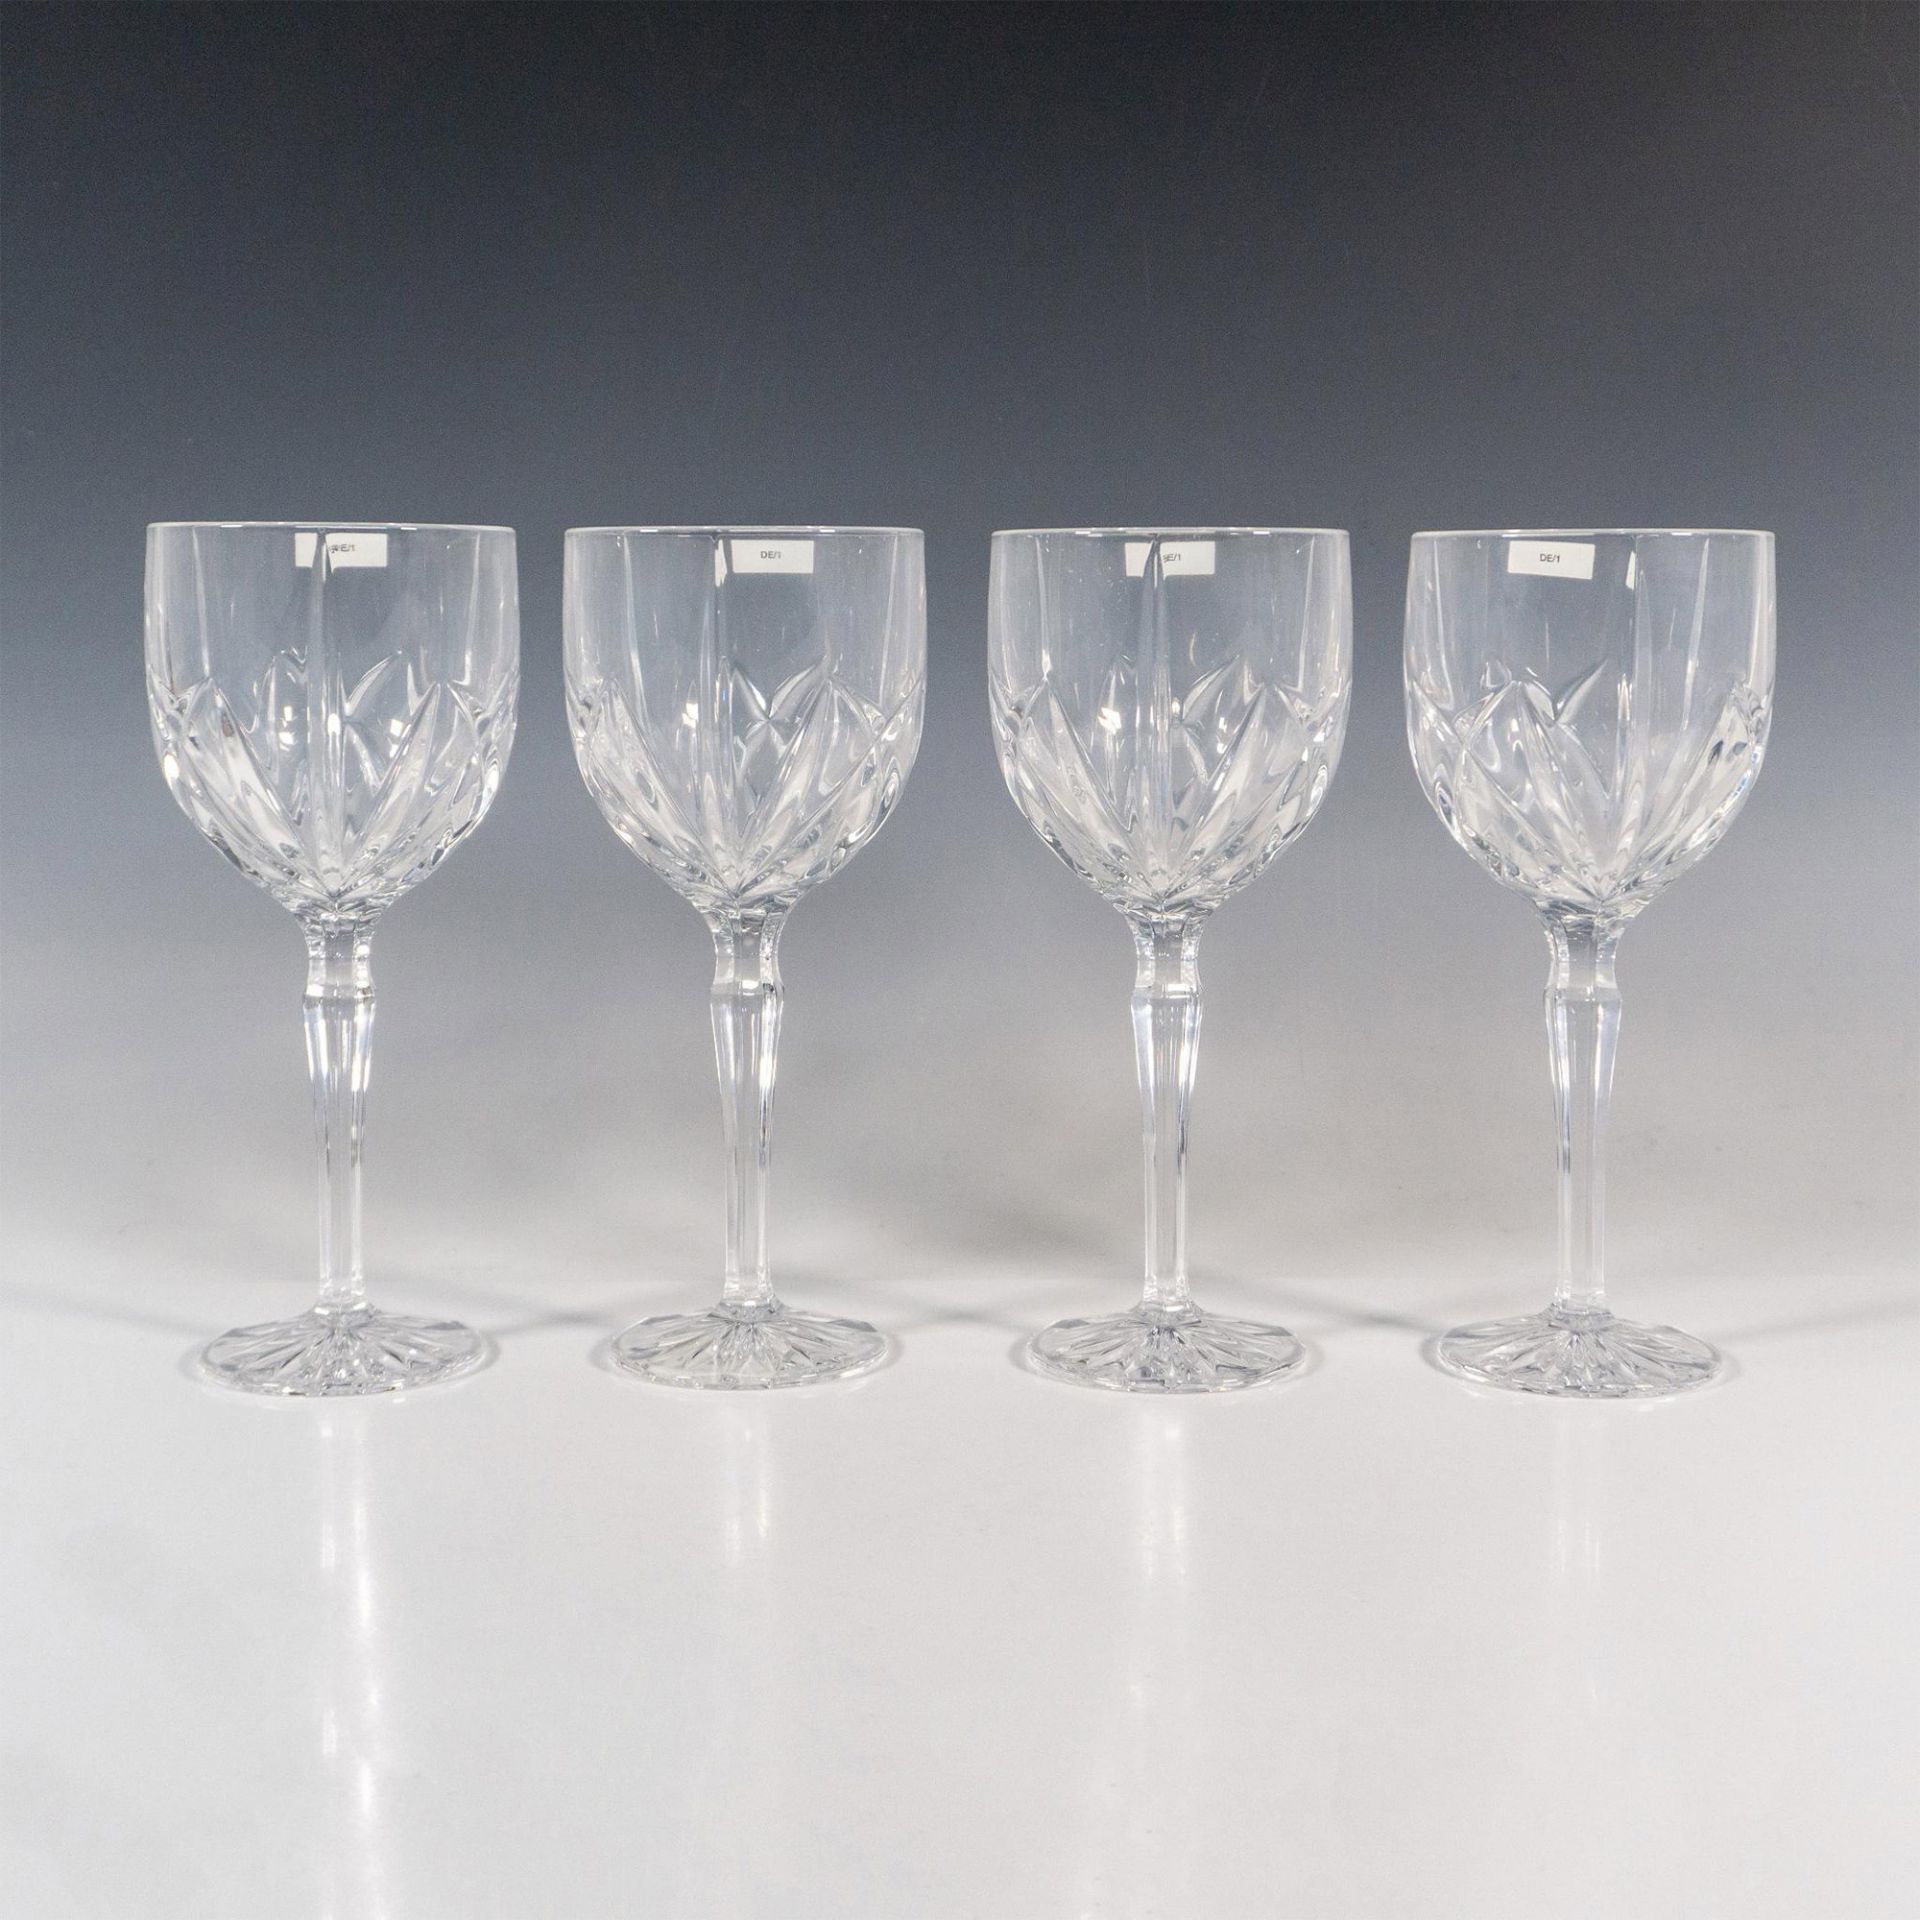 4pc Marquis by Waterford Wine Glasses, Brookside